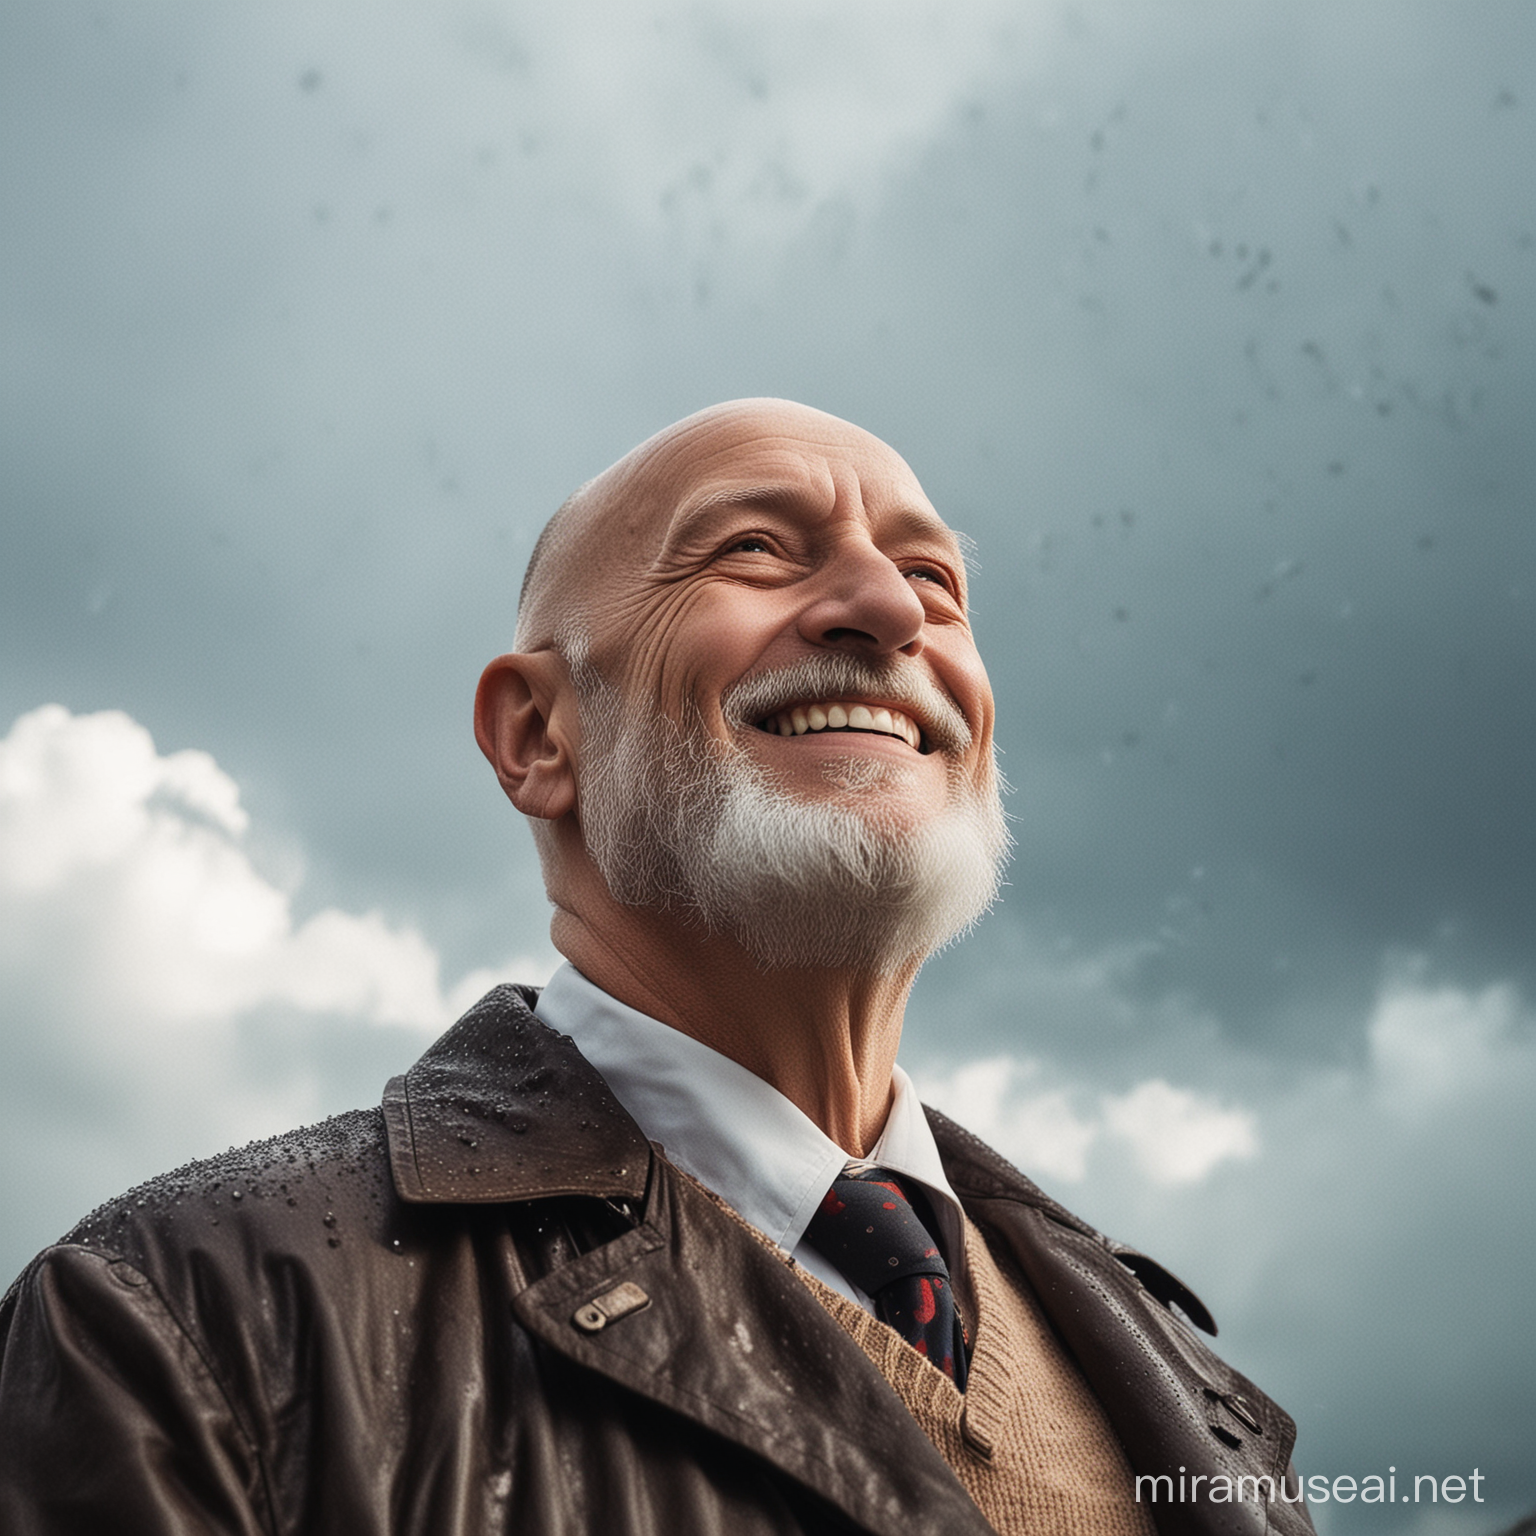 outside is raining An older gentleman bald with a beard looking up at the sky smiling while standing outside